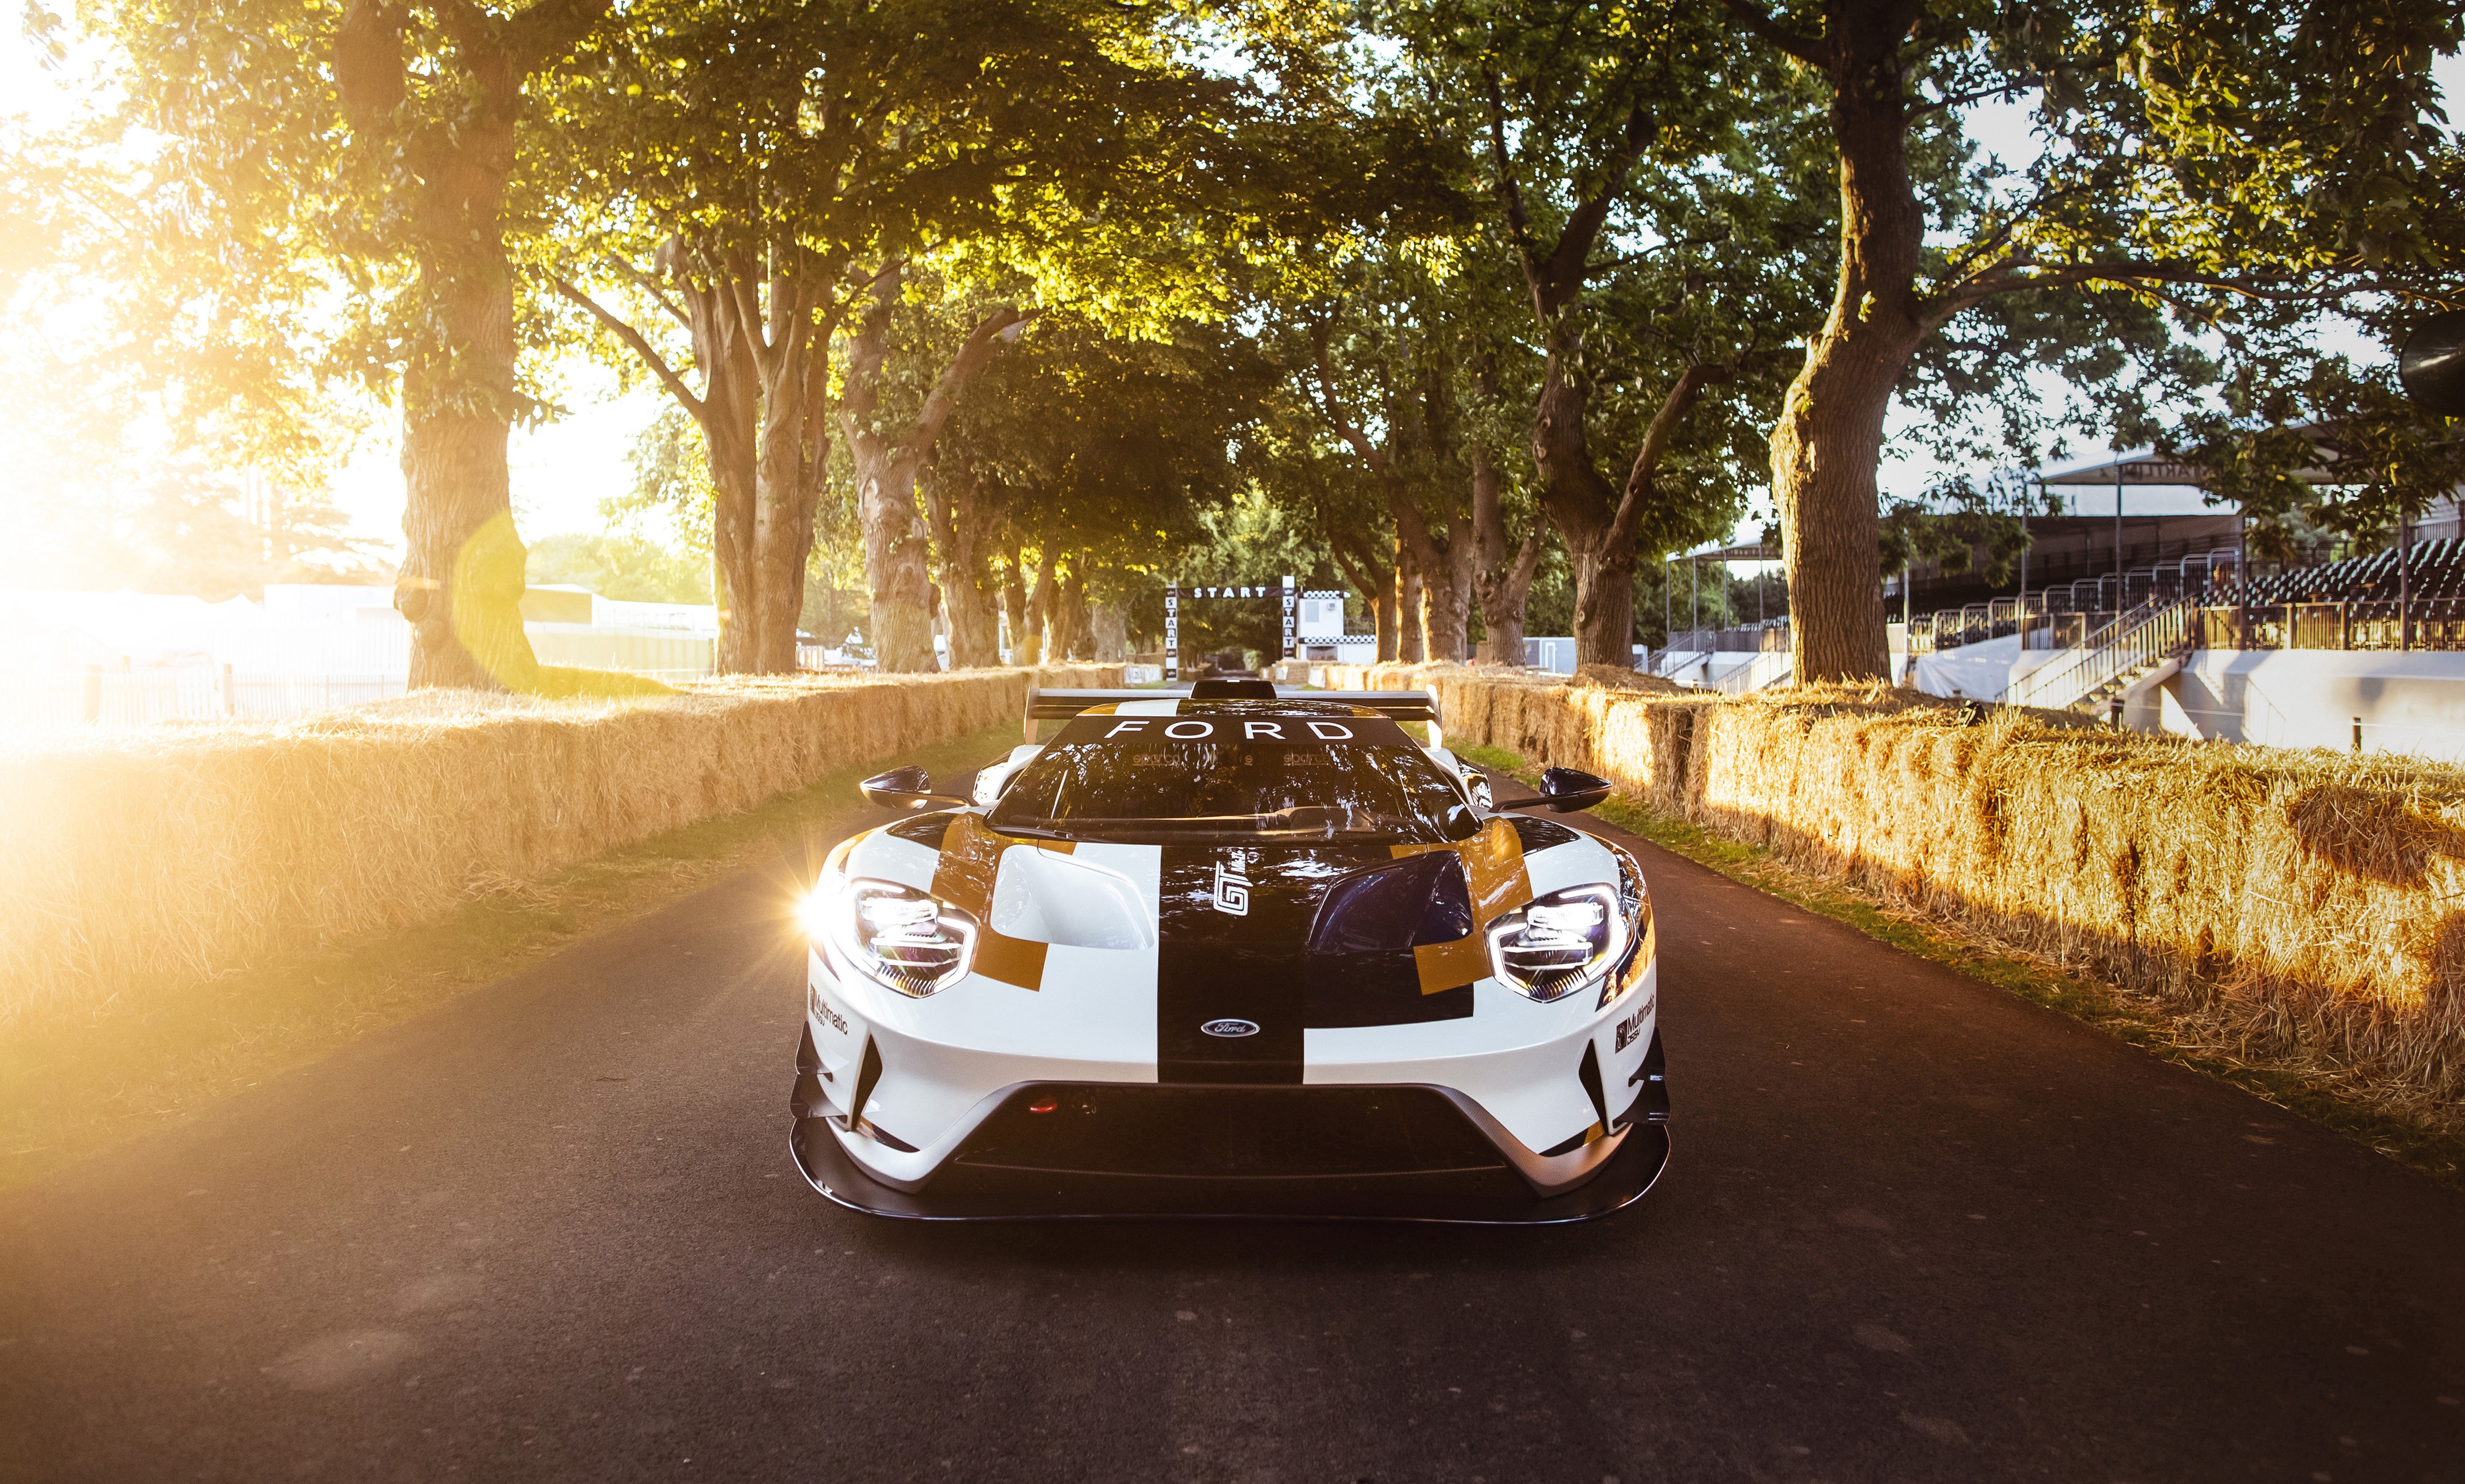 Free photo A ford gt mk ii race car stands on a road surrounded by trees